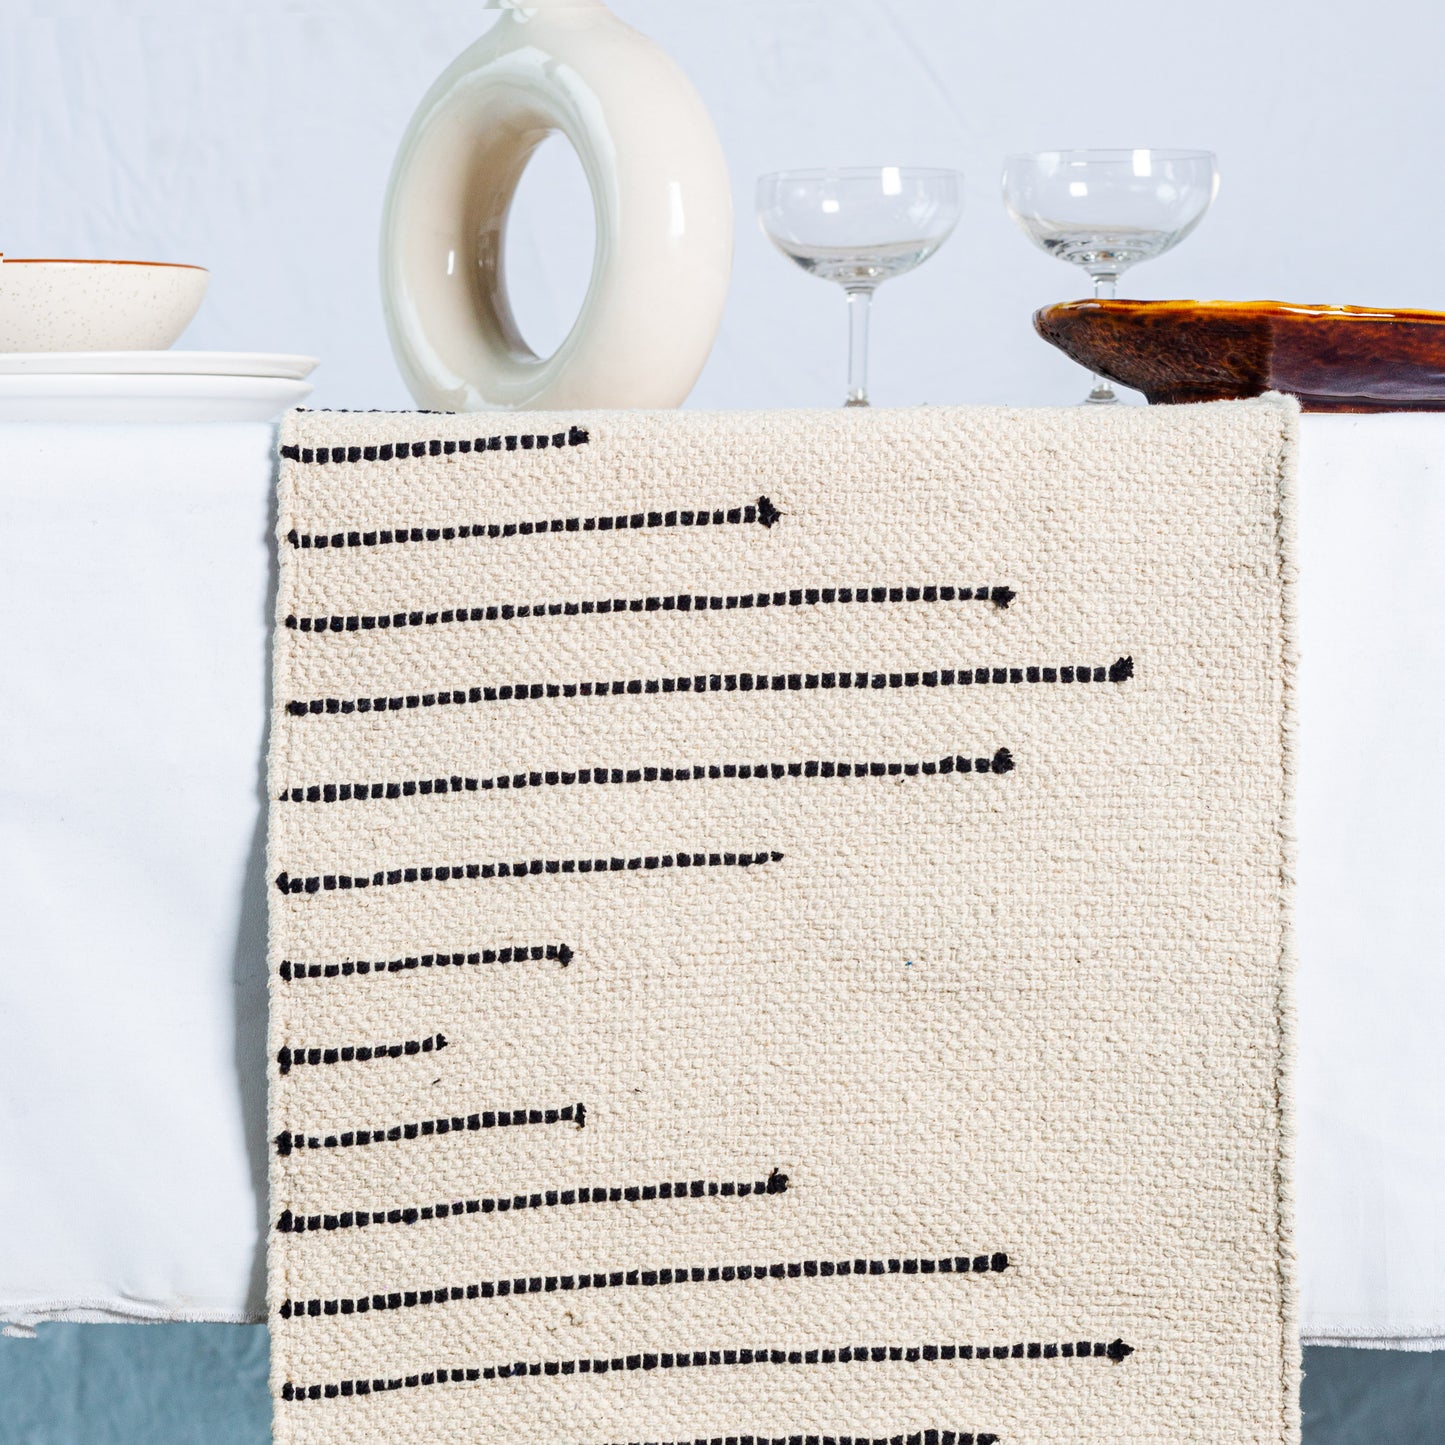 Table Runner close-up